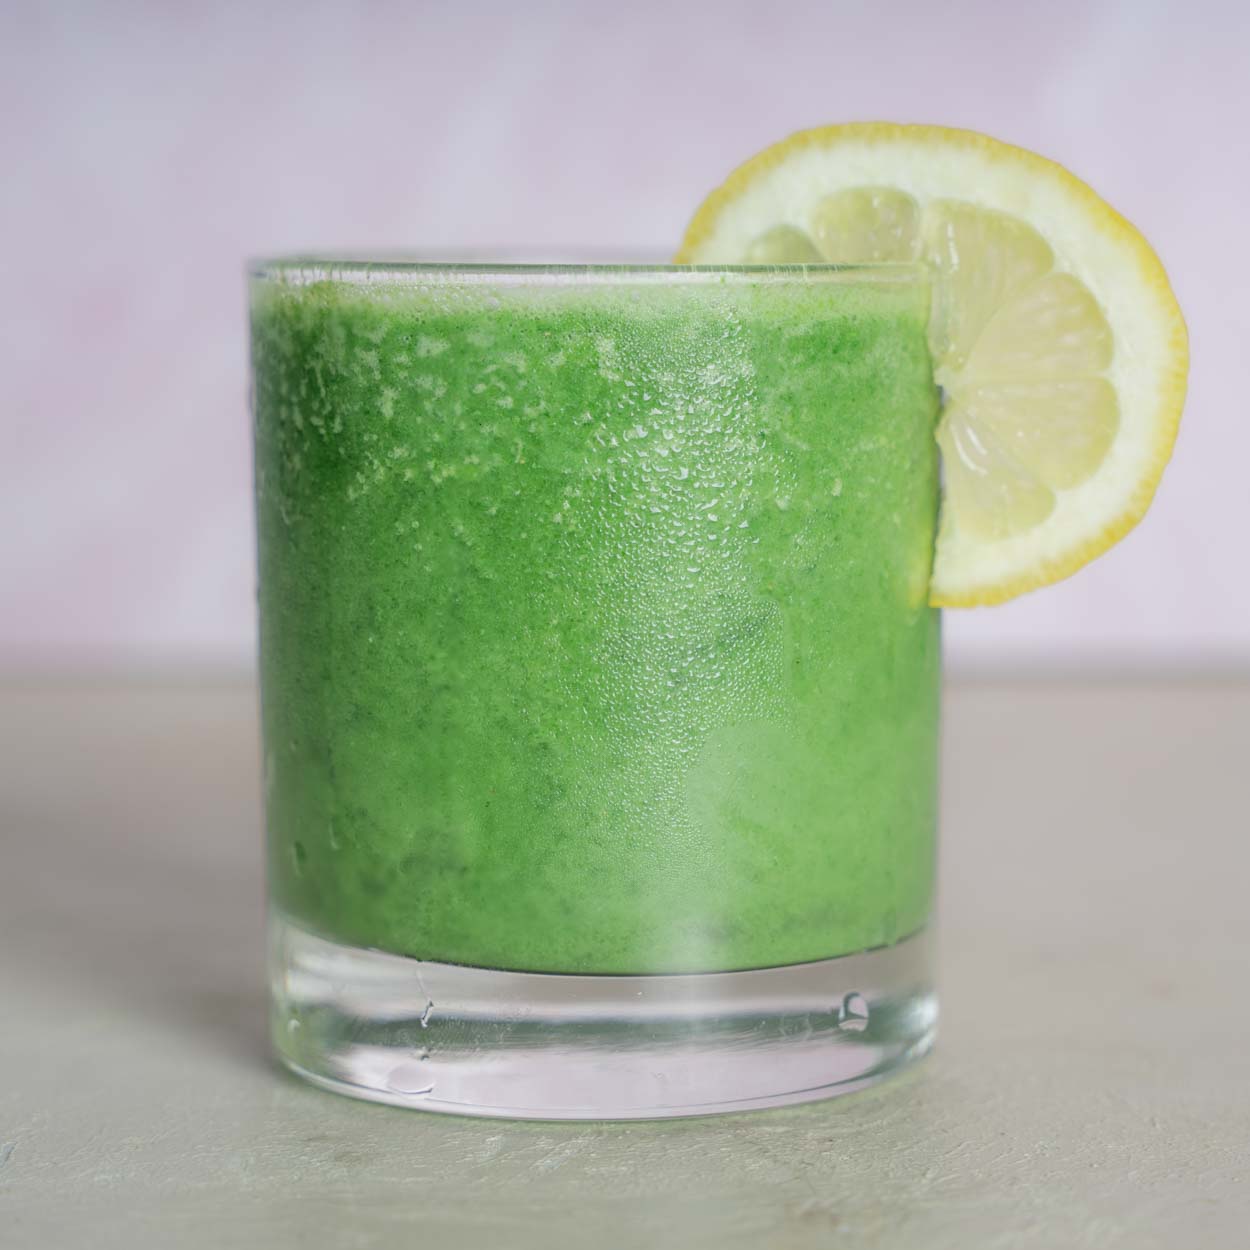 One glass of green juice smoothie with a garnish of lemon